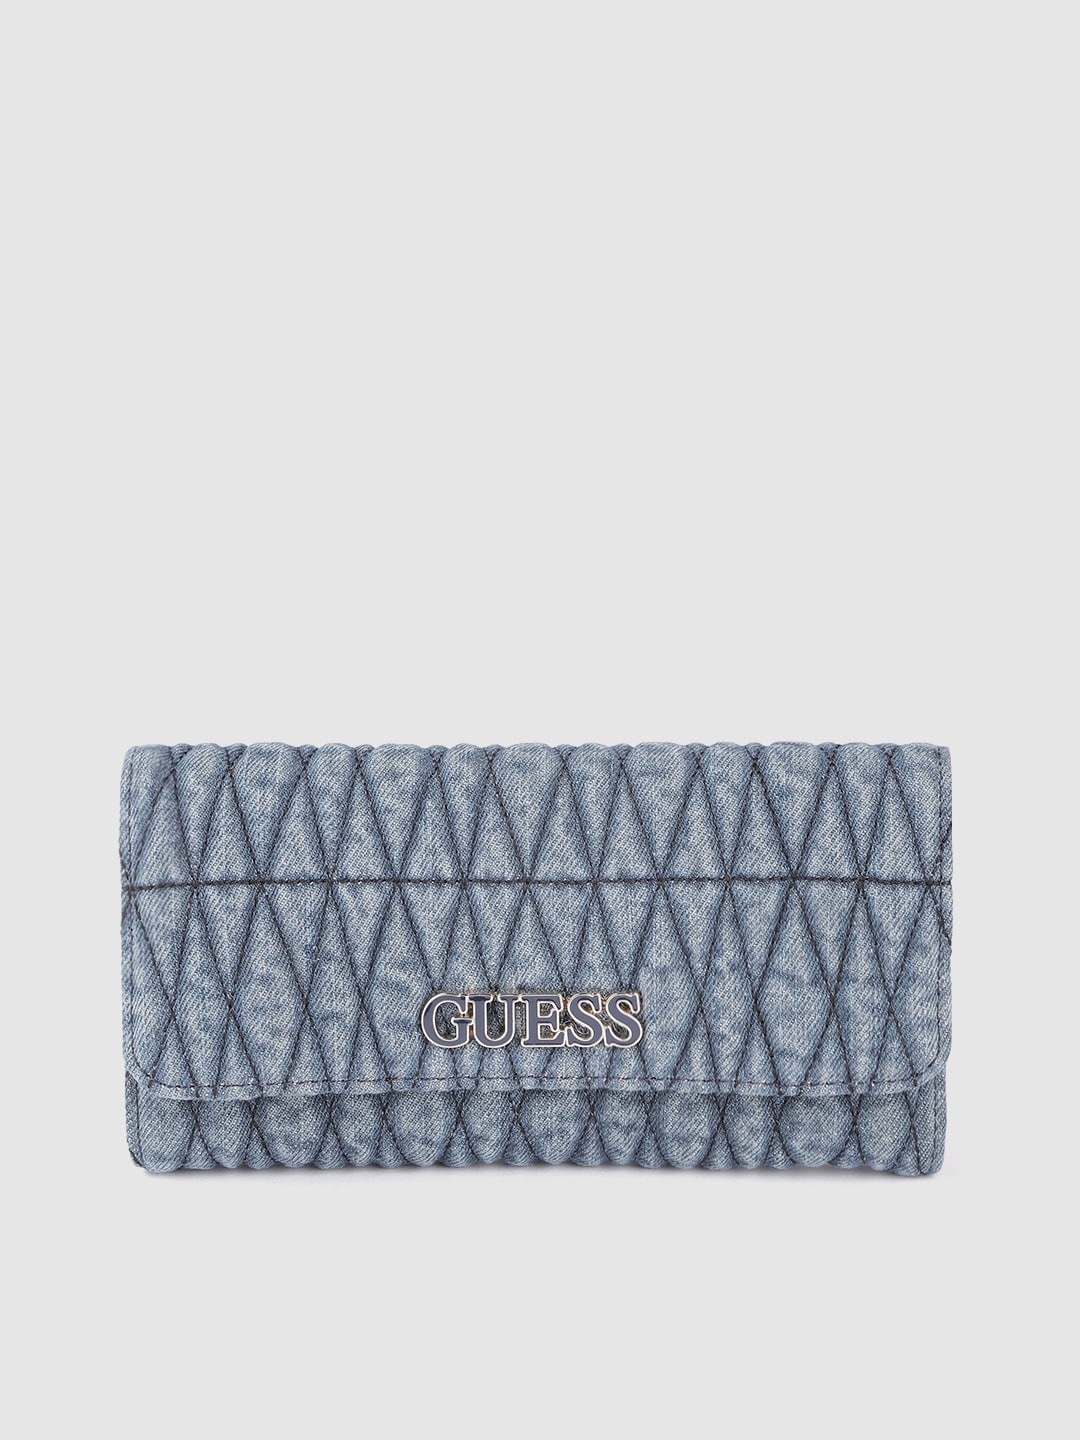 GUESS Women Blue Quilted Three Fold Wallet Price in India